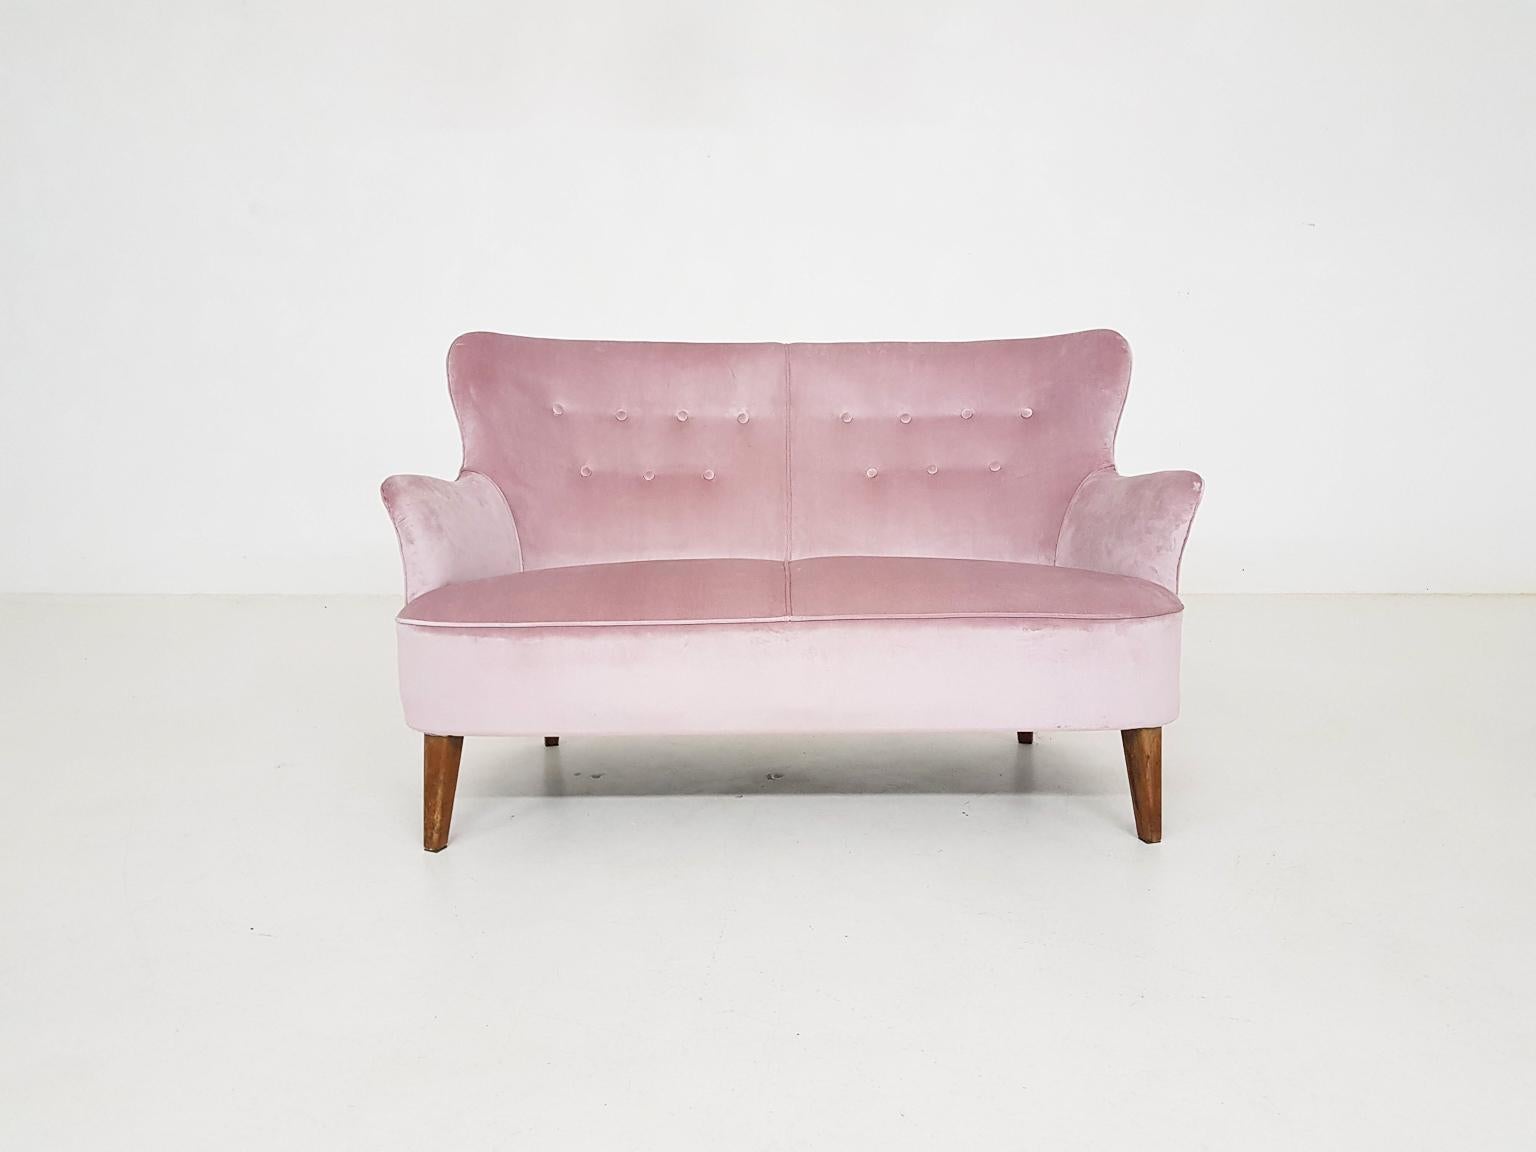 Lovely two-seat sofa in new pink velvet by Dutch designer Theo Ruth for Artifort the Netherlands.

Theo Ruth started working for Artifort in 1936. At Artifort he led a team of designers responsible for many works of famous designers as Pierre